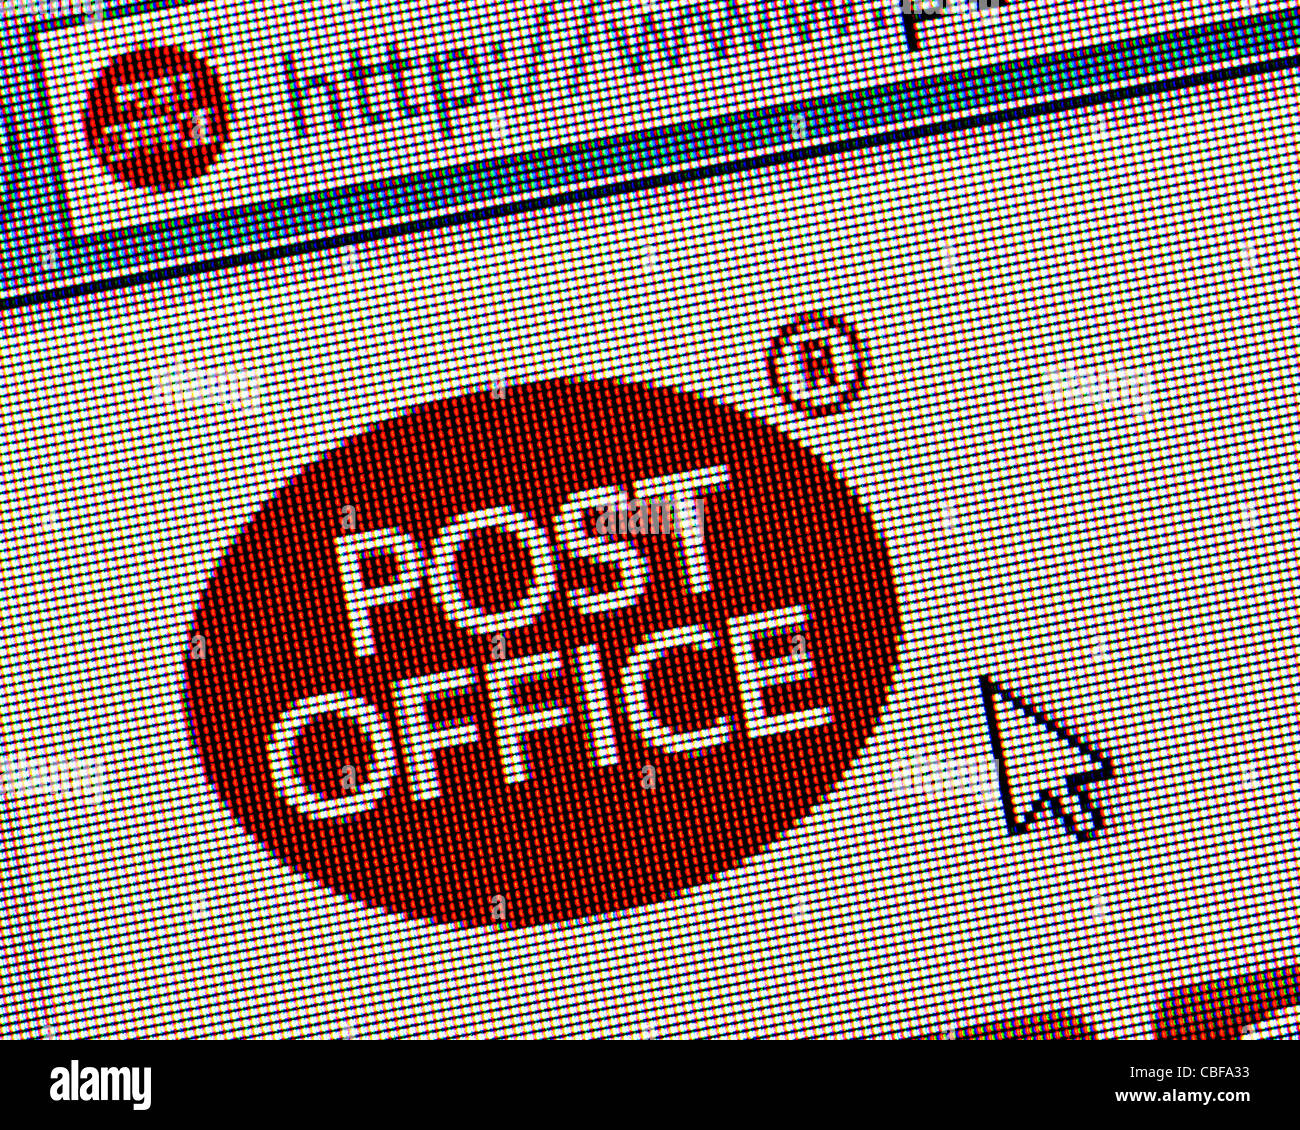 Post Office UK logo and website close up Stock Photo